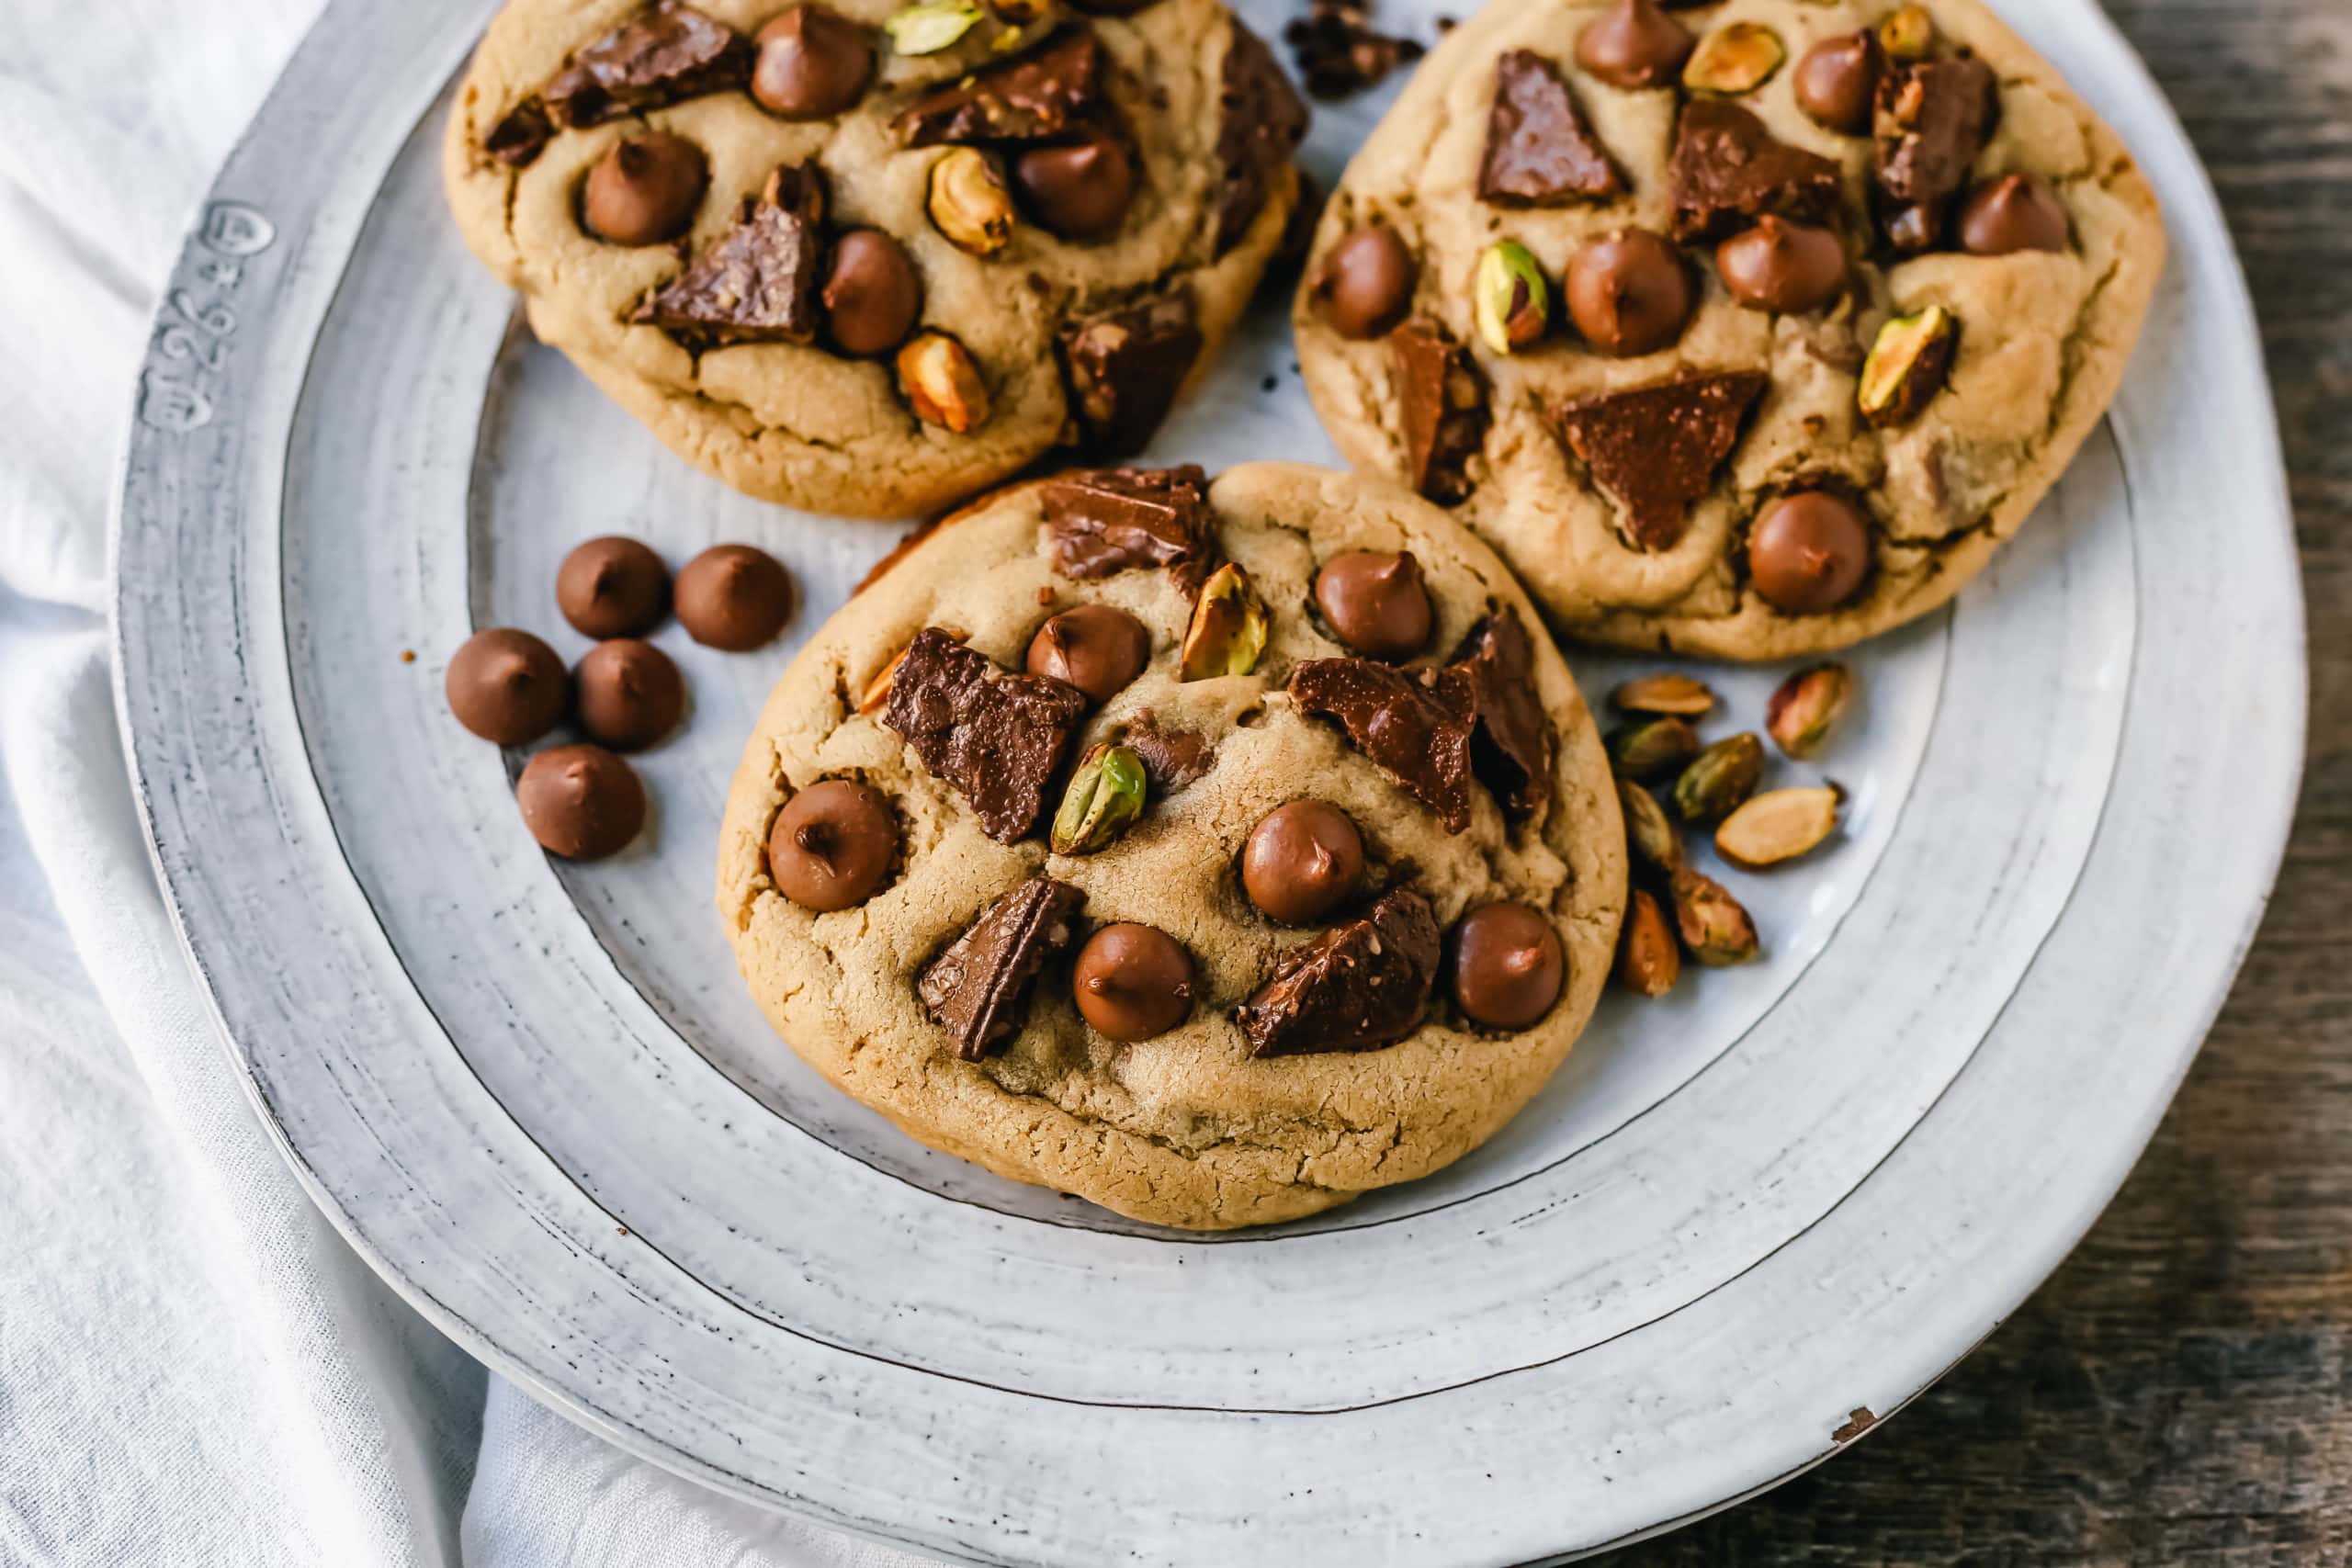 Pistachio Toffee Chocolate Chip Cookies Thick, chewy bakery-style cookies with milk chocolate toffee, pistachios, and milk chocolate chips. A sweet and salty cookie!